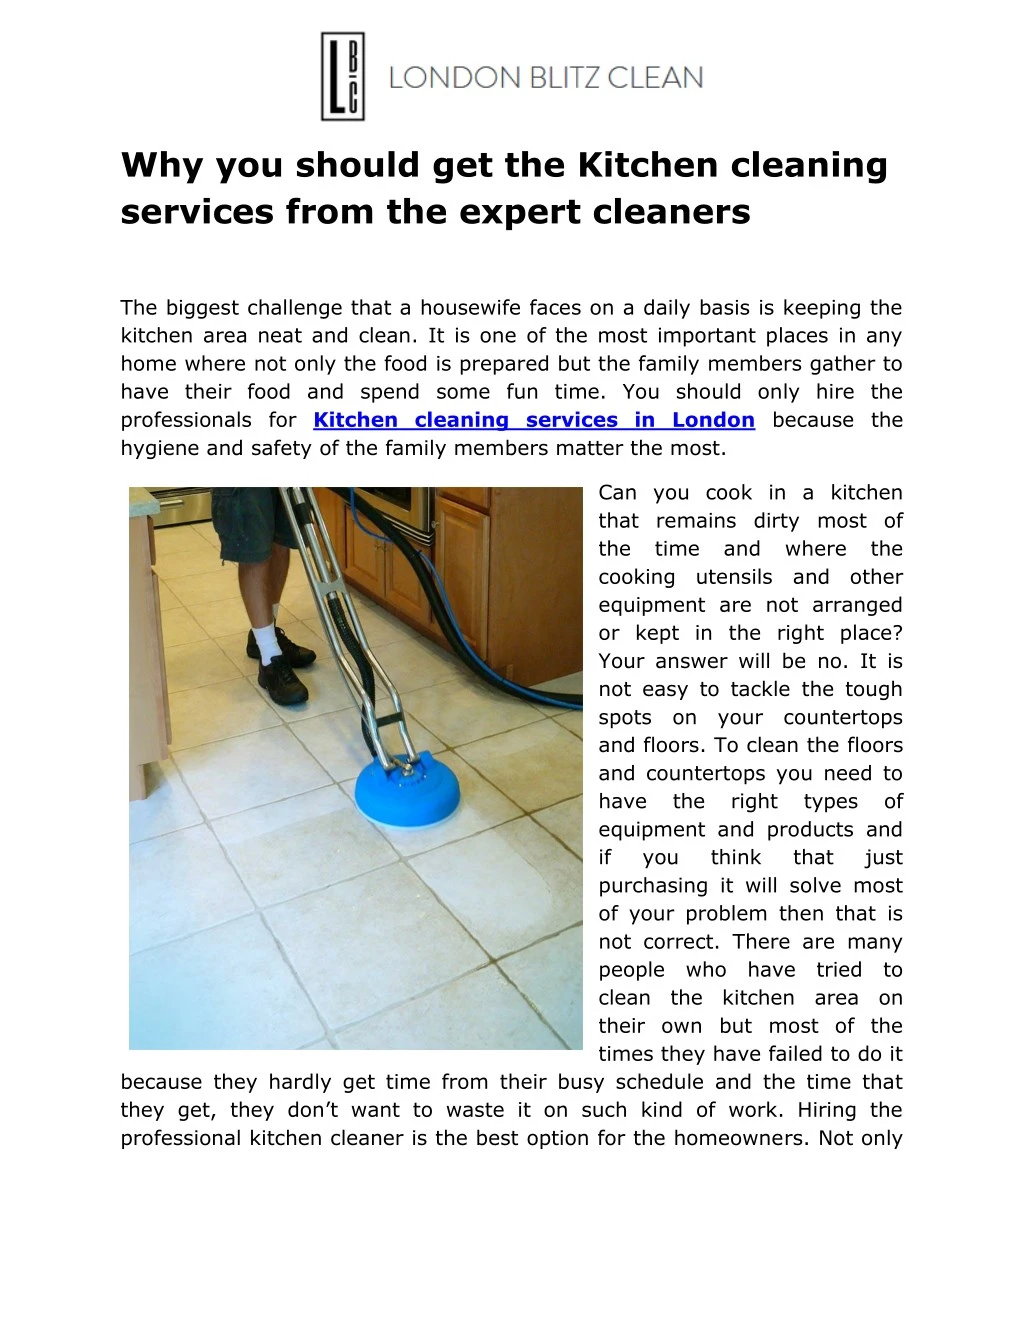 why you should get the kitchen cleaning services